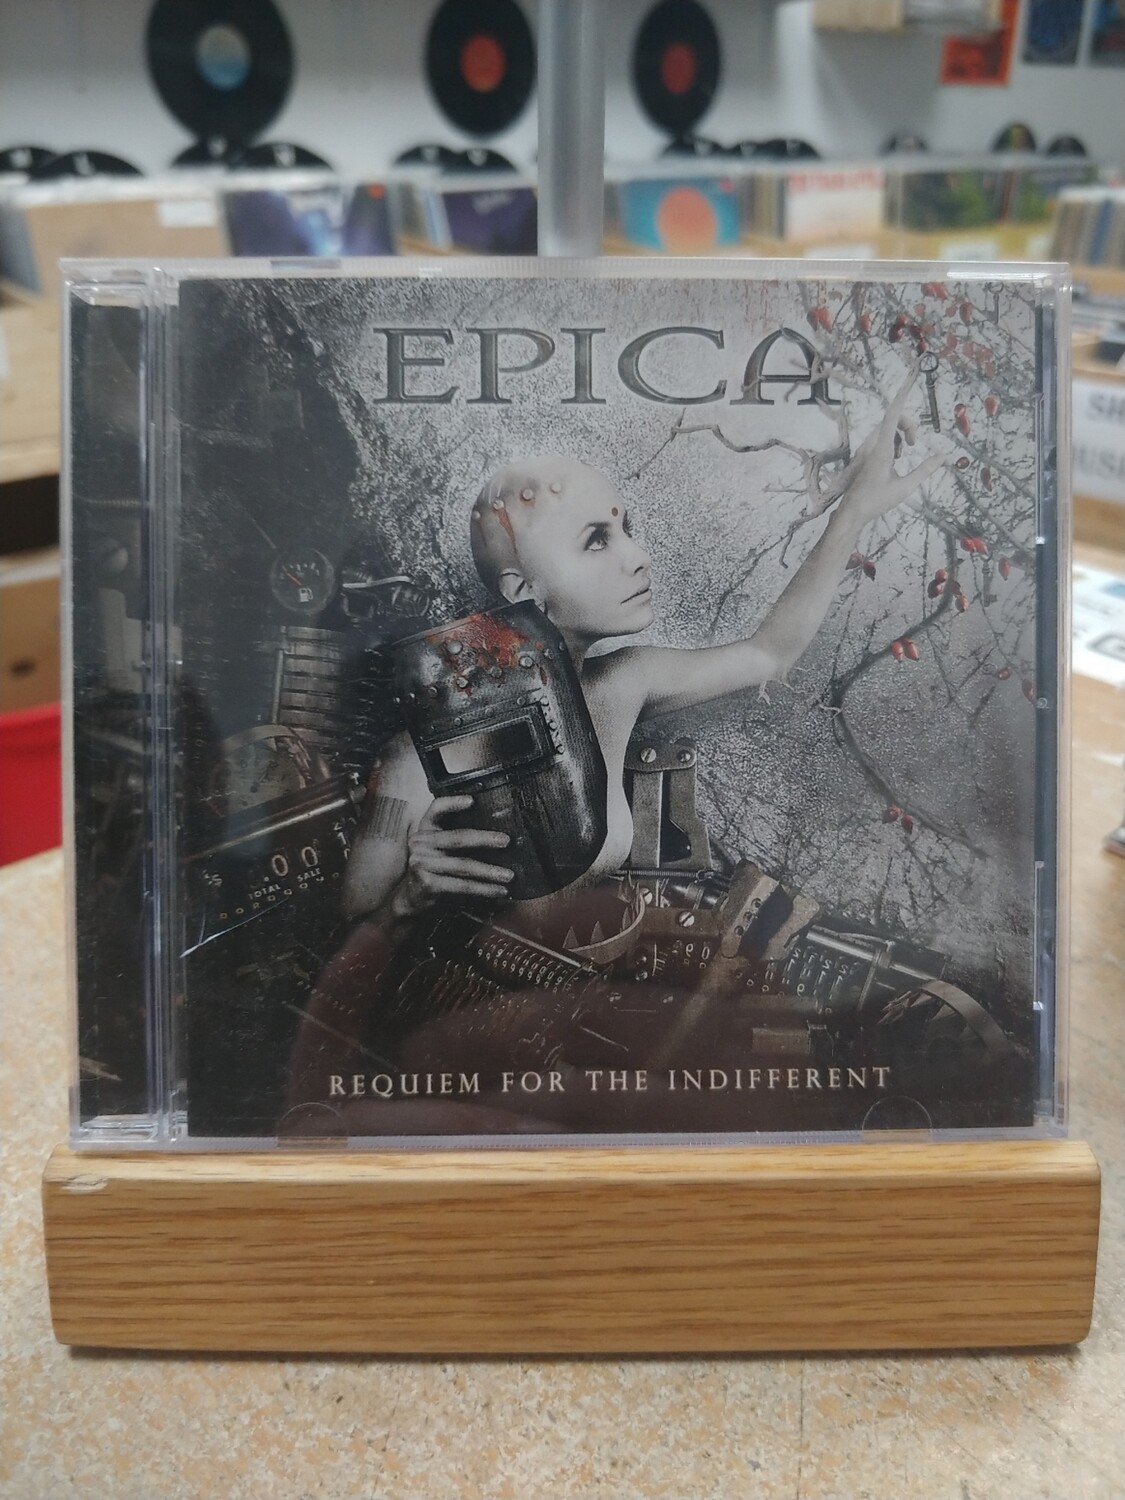 Epica - Requiem for the indifferent (CD)